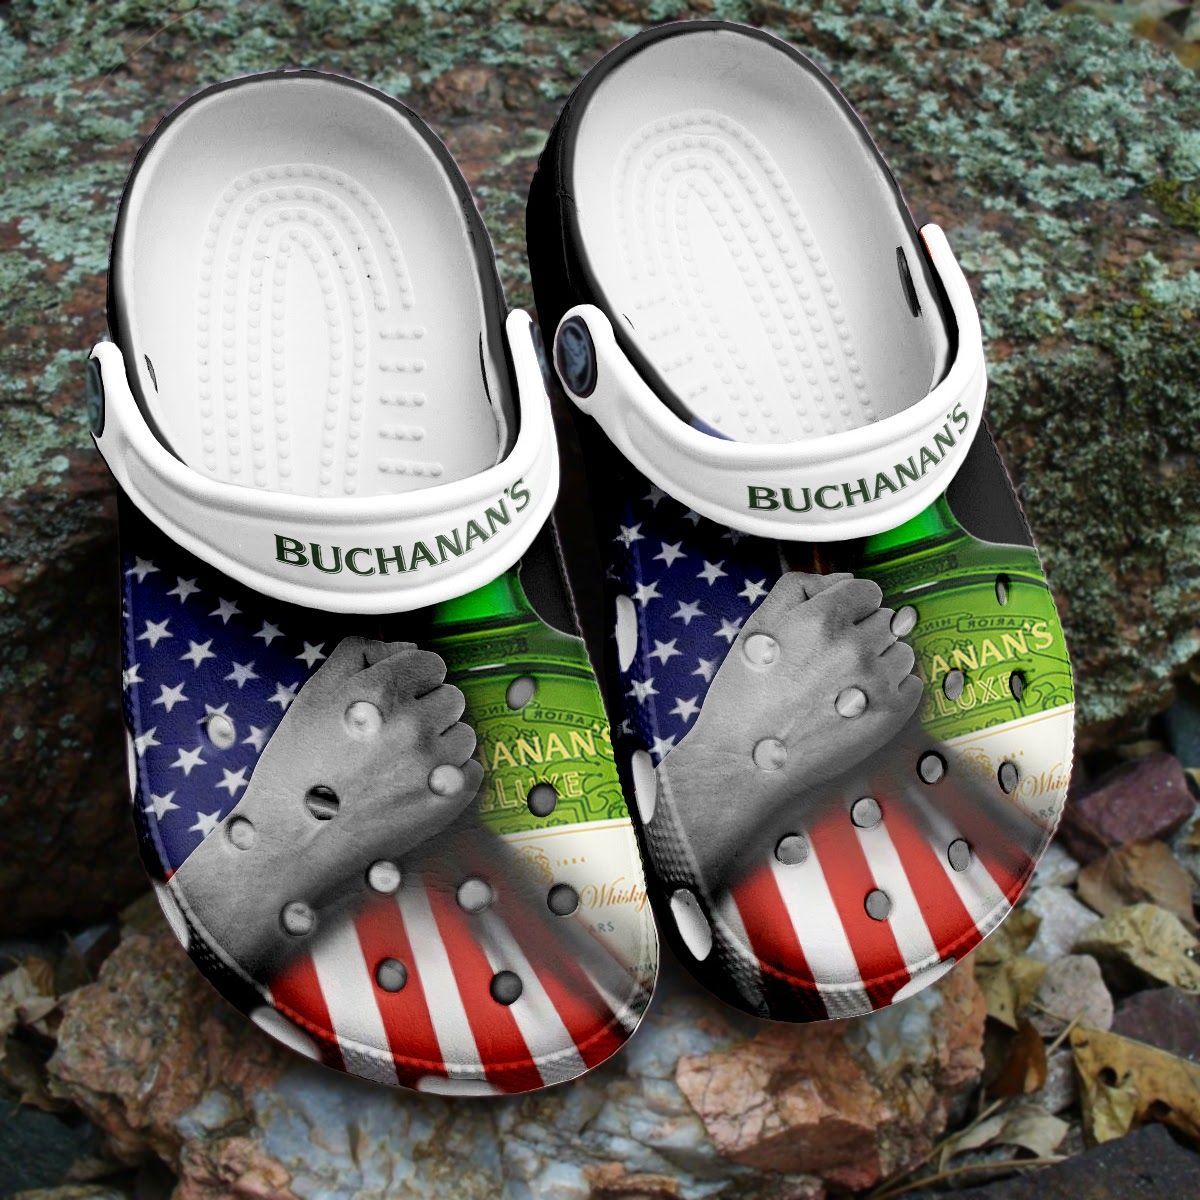 If you'd like to purchase a pair of Crocband Clogs, be sure to check out the official website. 148